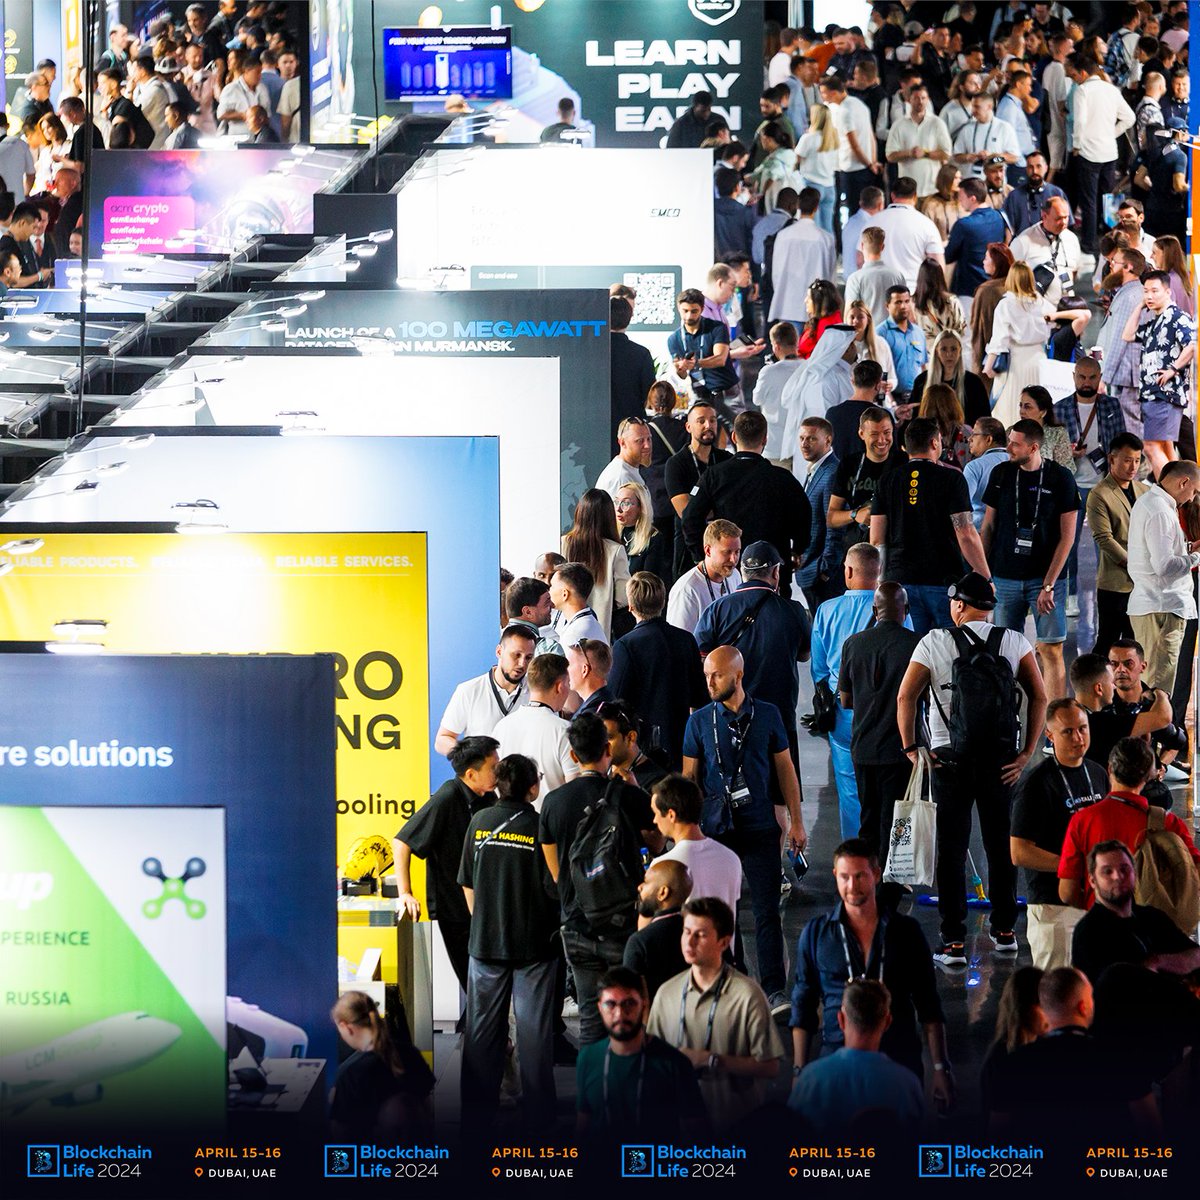 🔥Despite #Dubai's unprecedented storm, @BlLife_Forum thundered on with 10,162 attendees, 160+ speakers, and 133 booths showcasing the latest in #crypto innovation! ✨Get ready for more on Oct 22-23! Presale tickets: 8t6.me/vmswgU #BlockchainLife2024